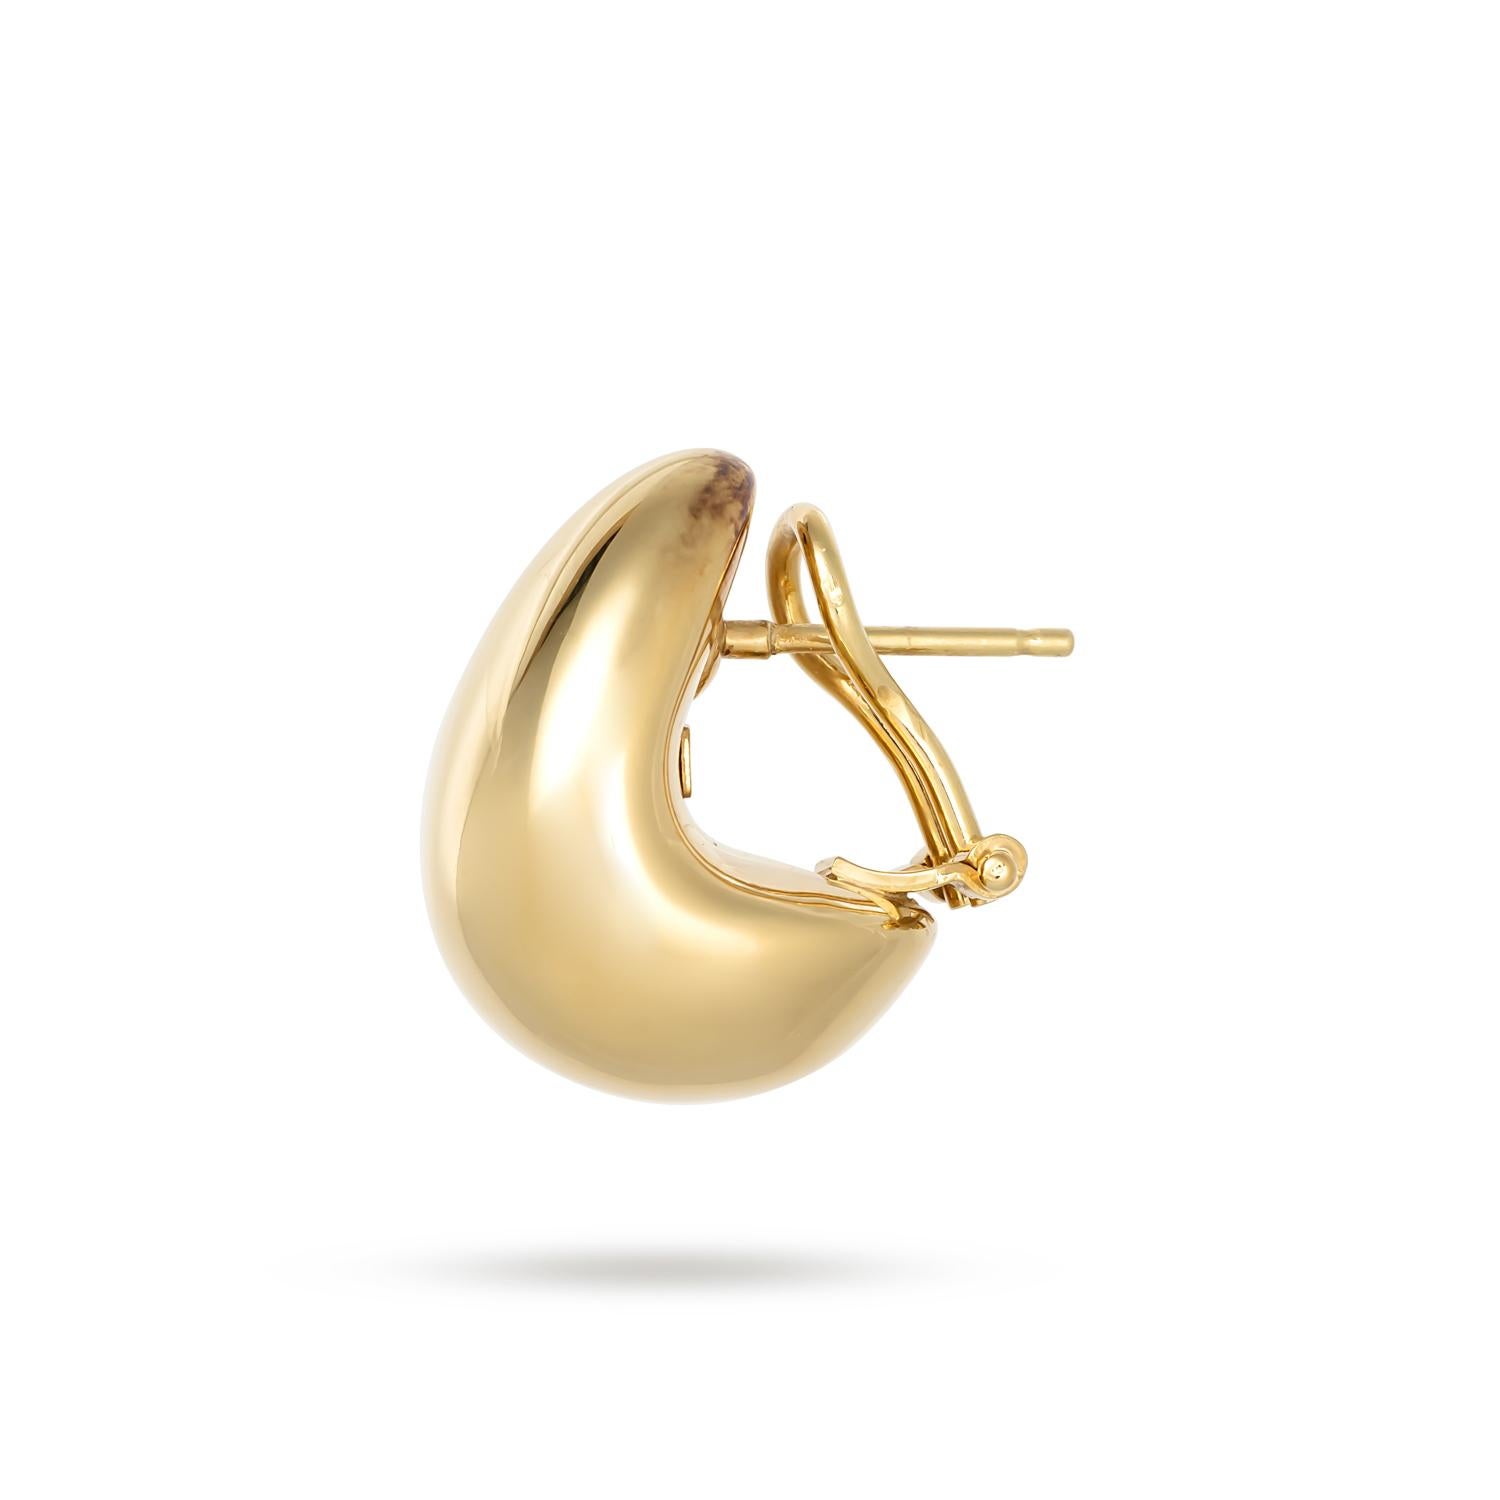 Elevate your elegance with the exquisite allure of Roberto Coin Designer Gold Domed Earrings, a masterpiece crafted in luxurious 18k yellow gold. Designed for the modern sophisticate, these earrings boast a lightweight and hollow construction,